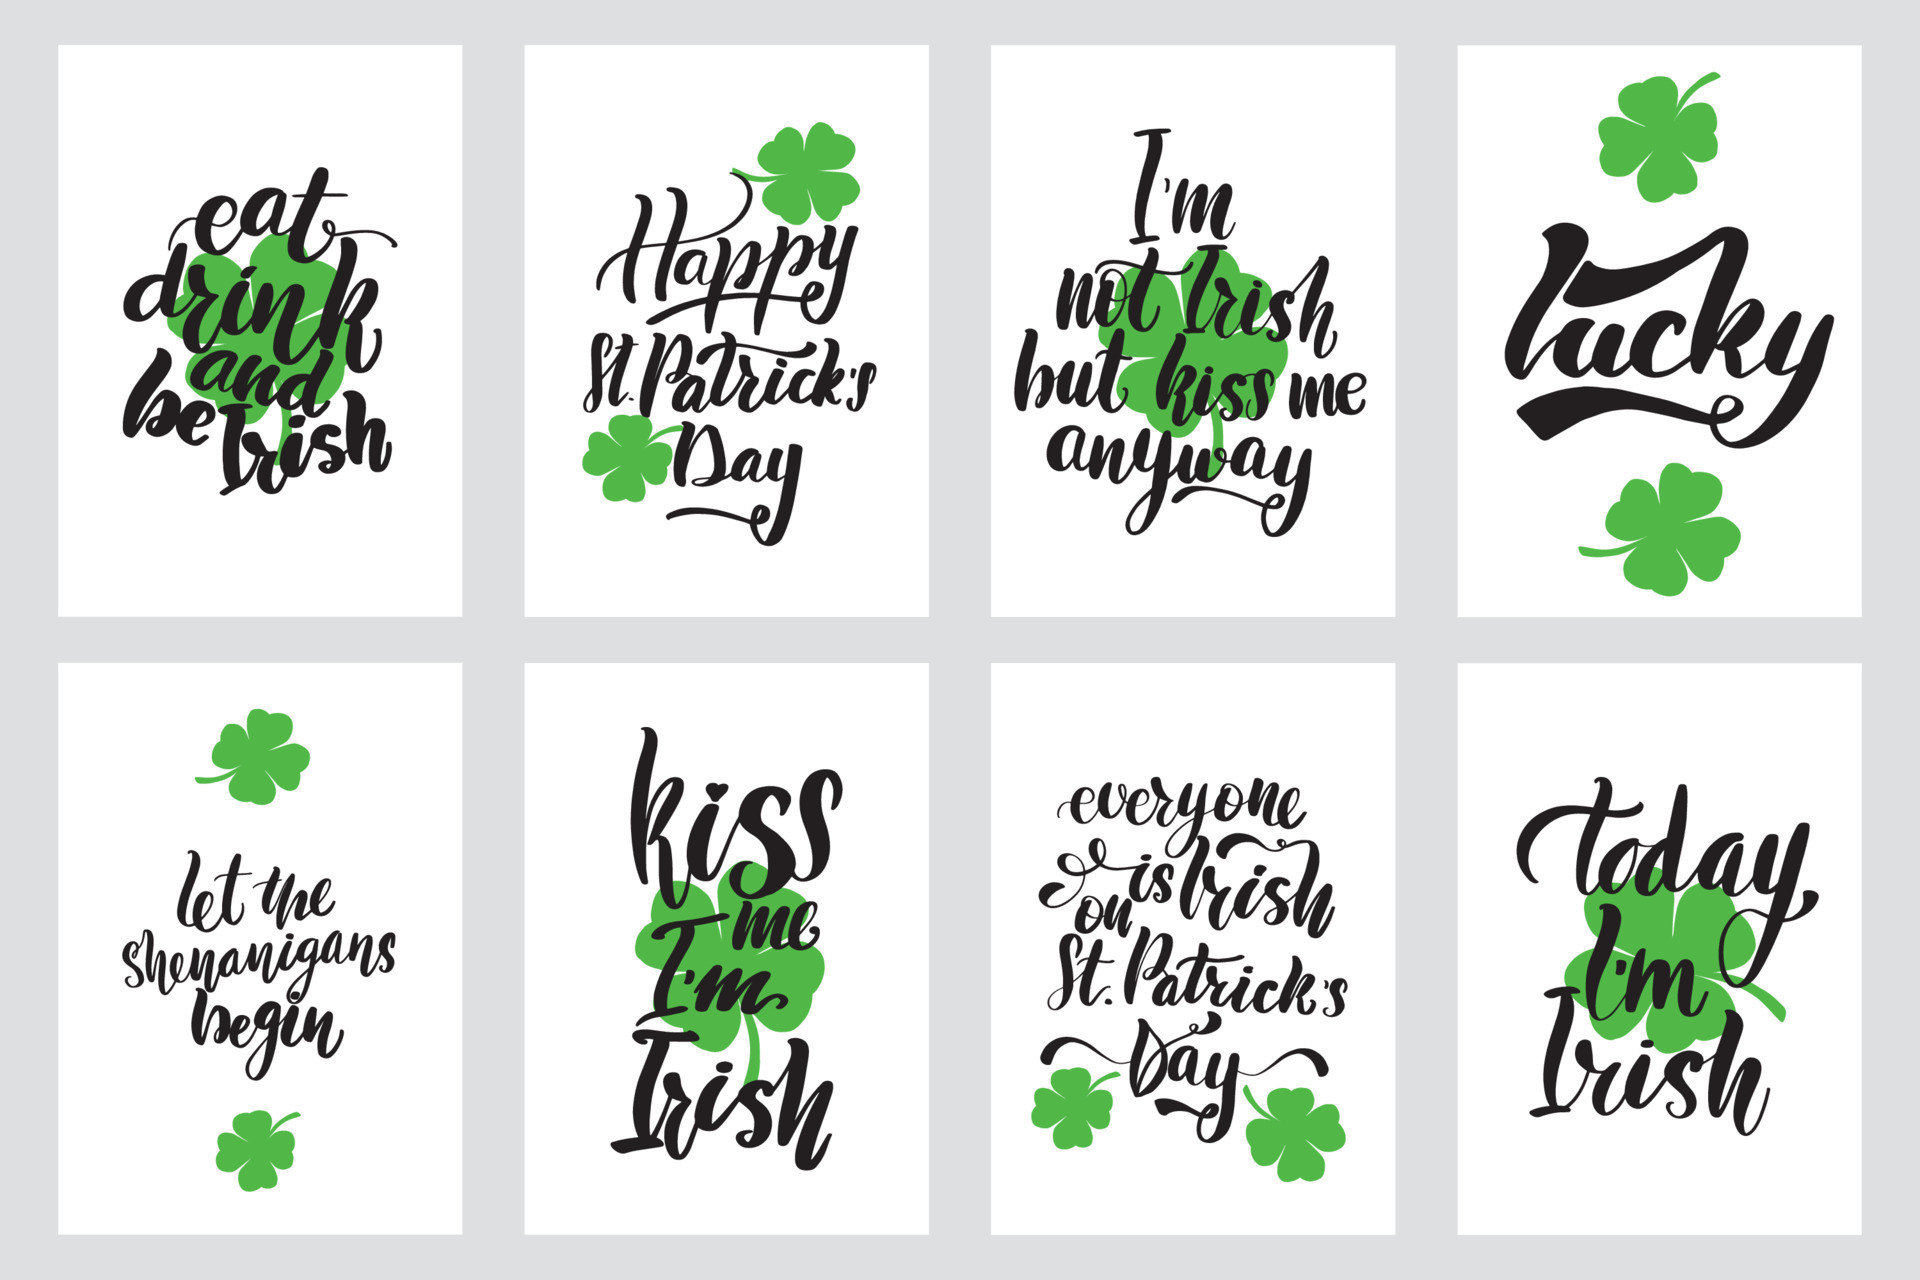 Hand Drawn St Patricks Day Logotype Vector Lettering Typography